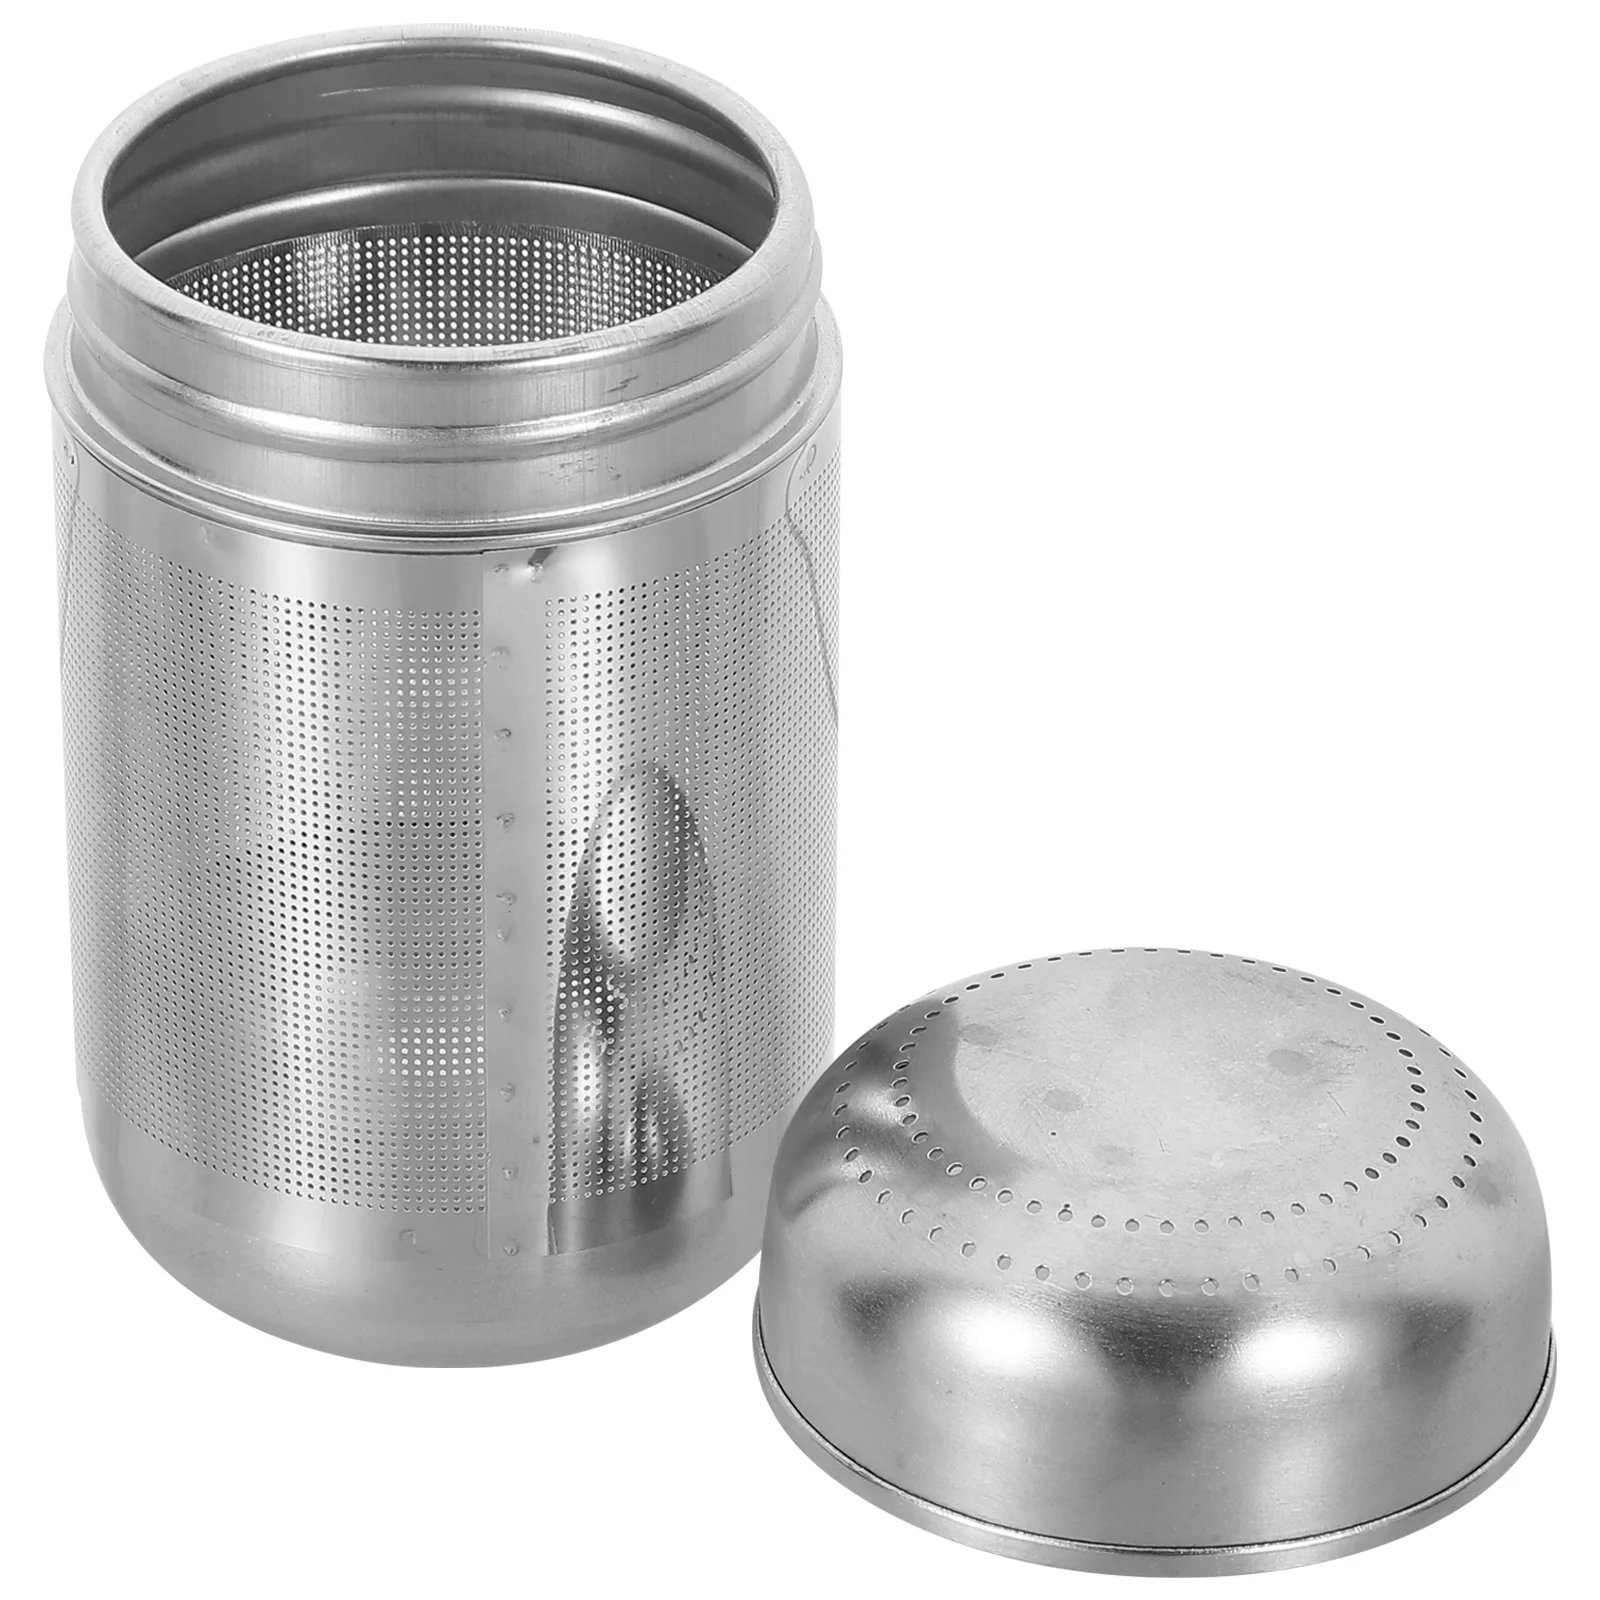 

Tea Filter Convenient Strainer Household Seasoning Infuser Reusable Stainless Steel Steeper Small Compact Professional